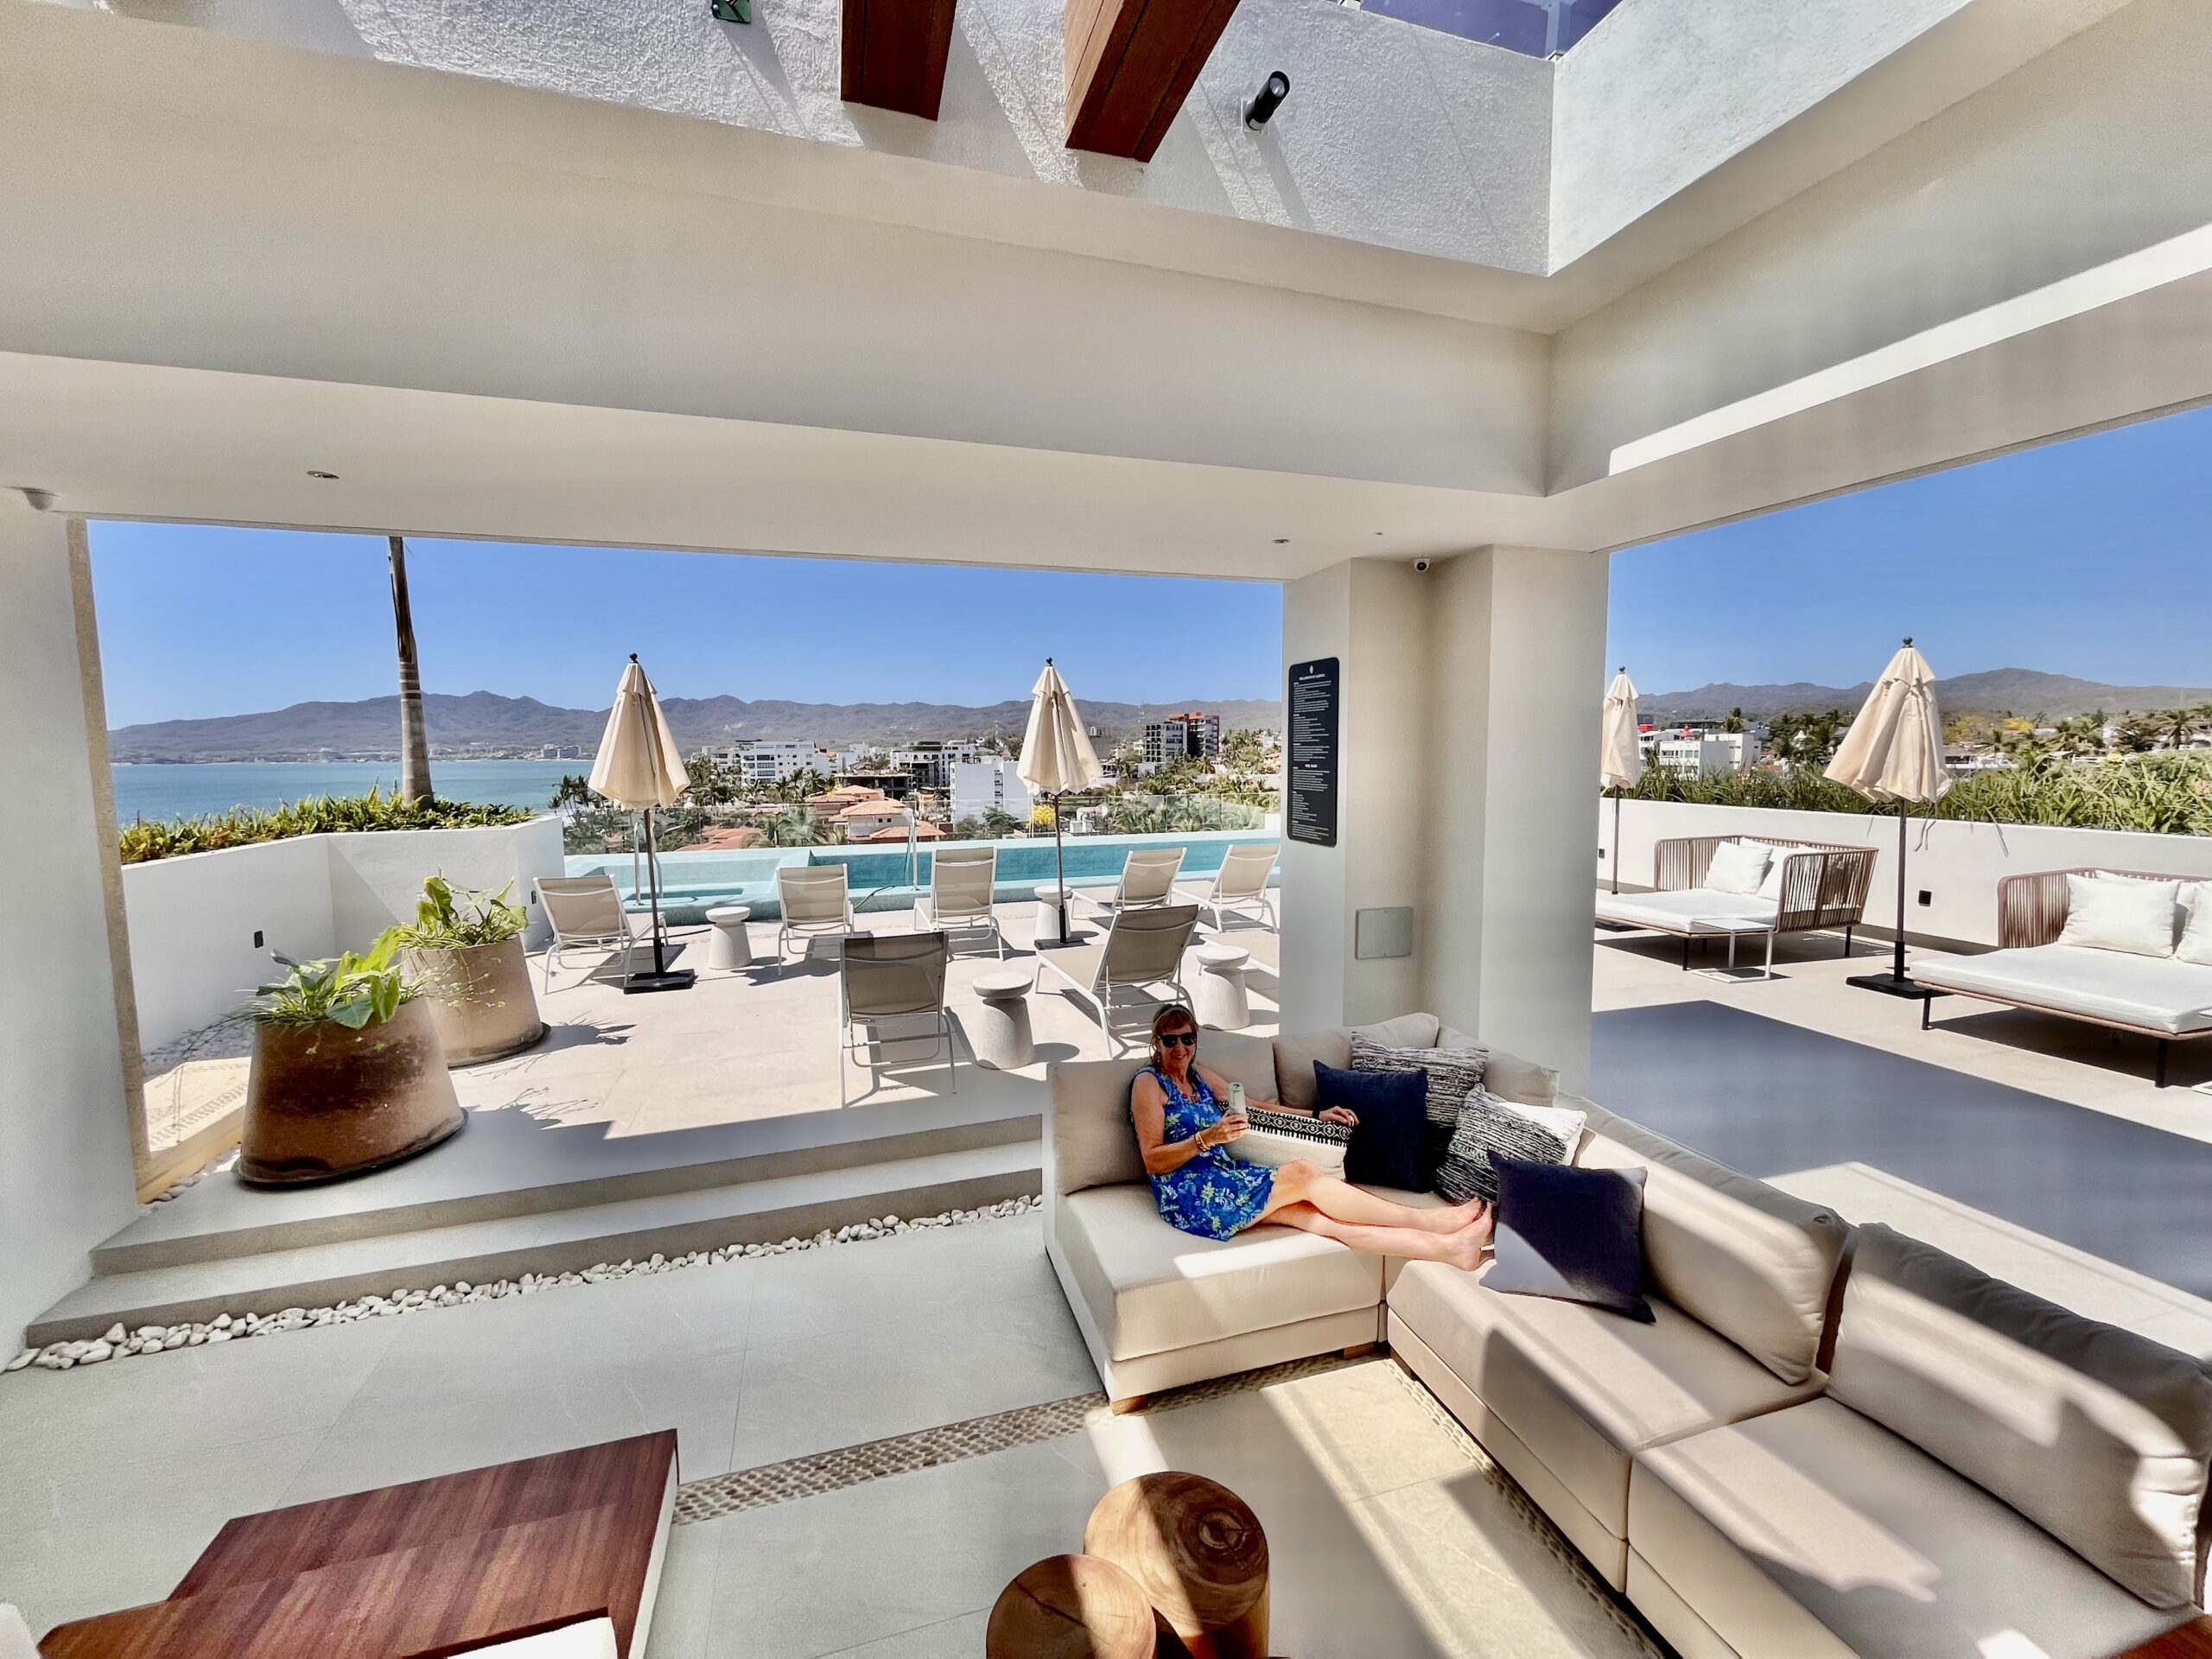 From Budget to Luxury: Diverse Rental Properties in Bucerias, Mexico